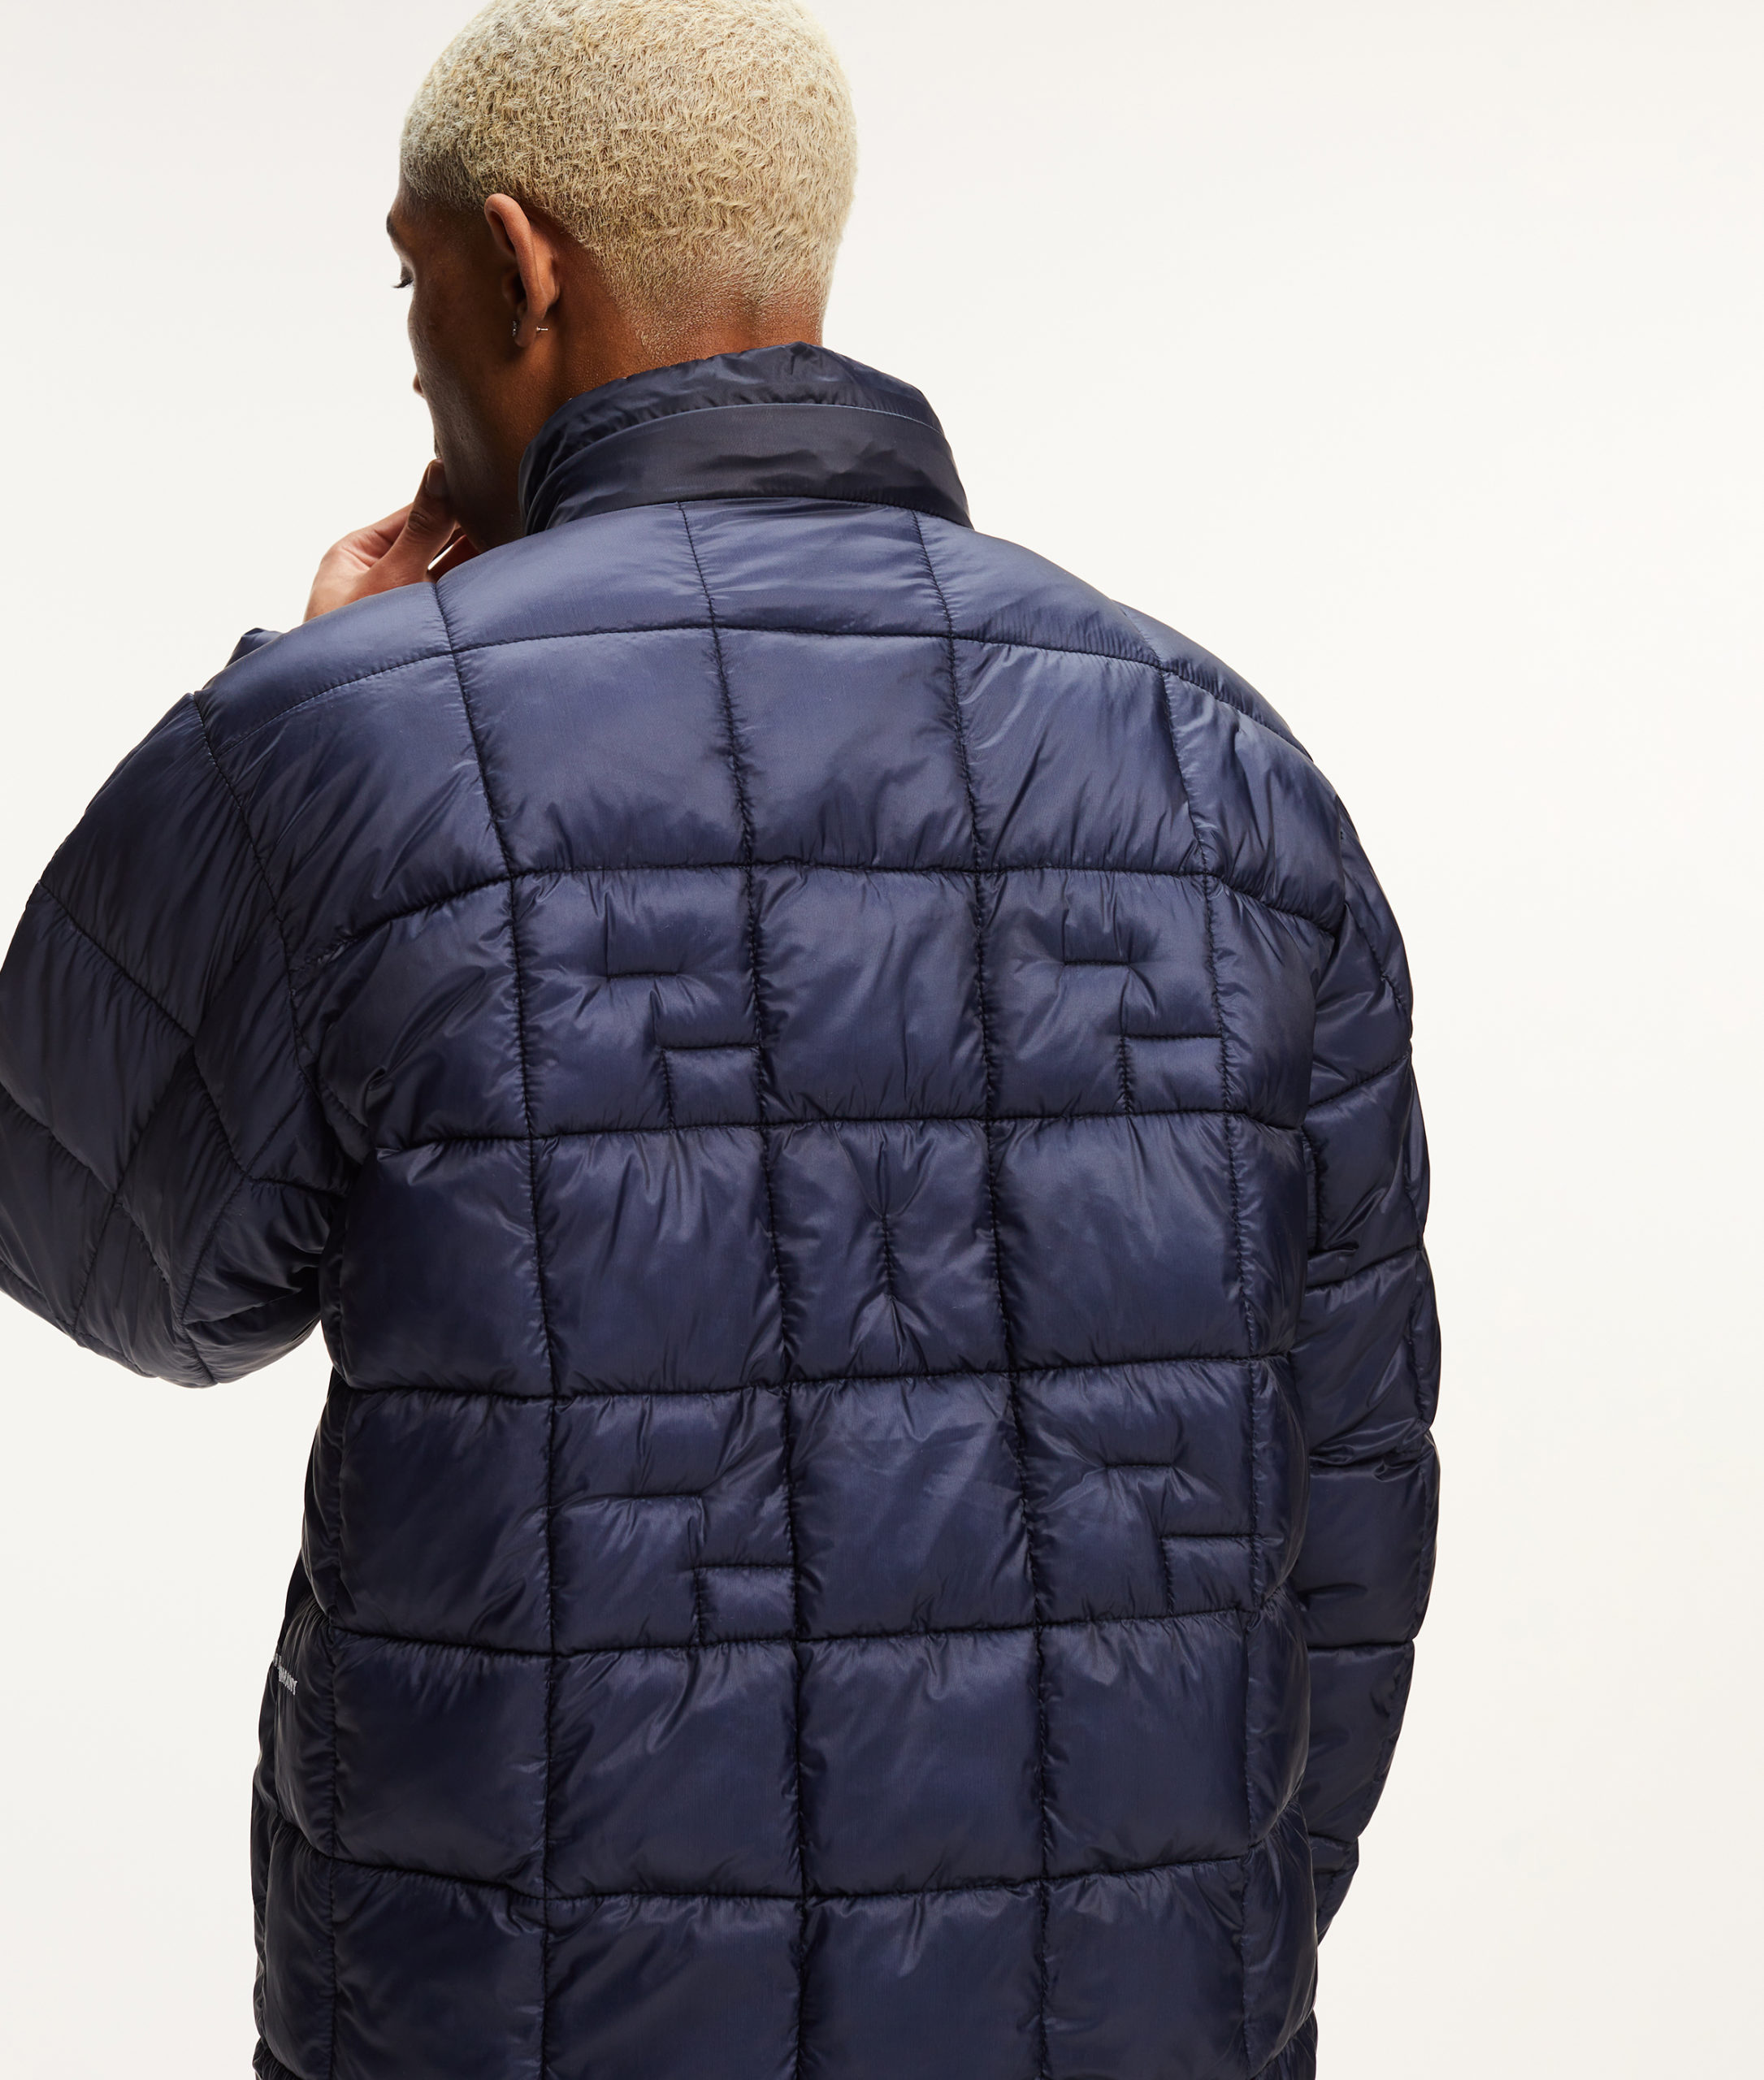 【POP TRADING COMPANY 】 QUILTED REVERSIBLE PUFFER JACKET